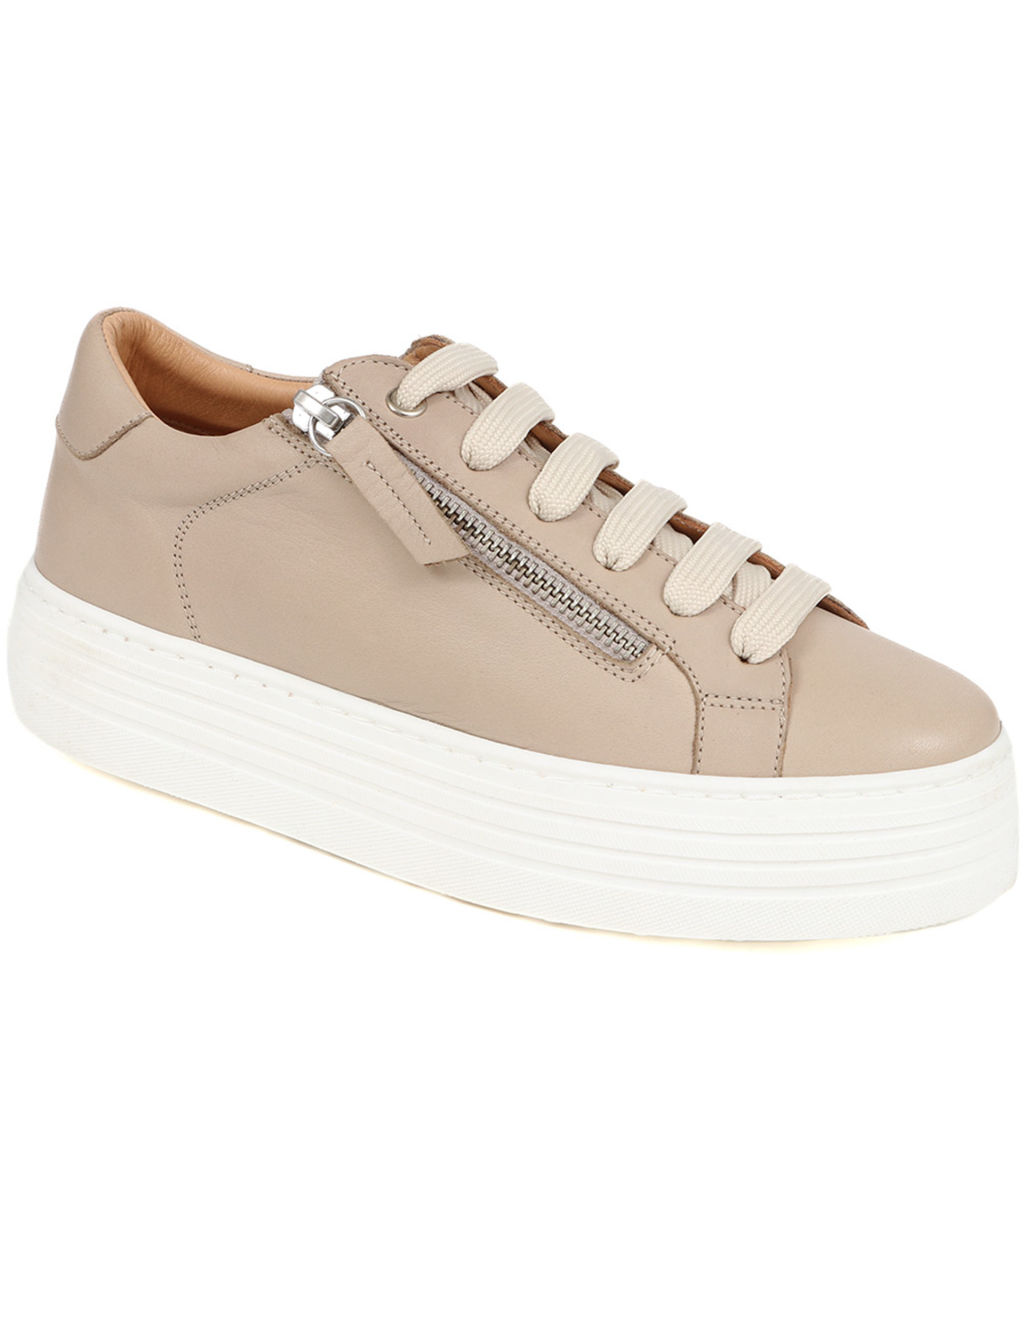 Leather Flatform Trainers 7 of 7